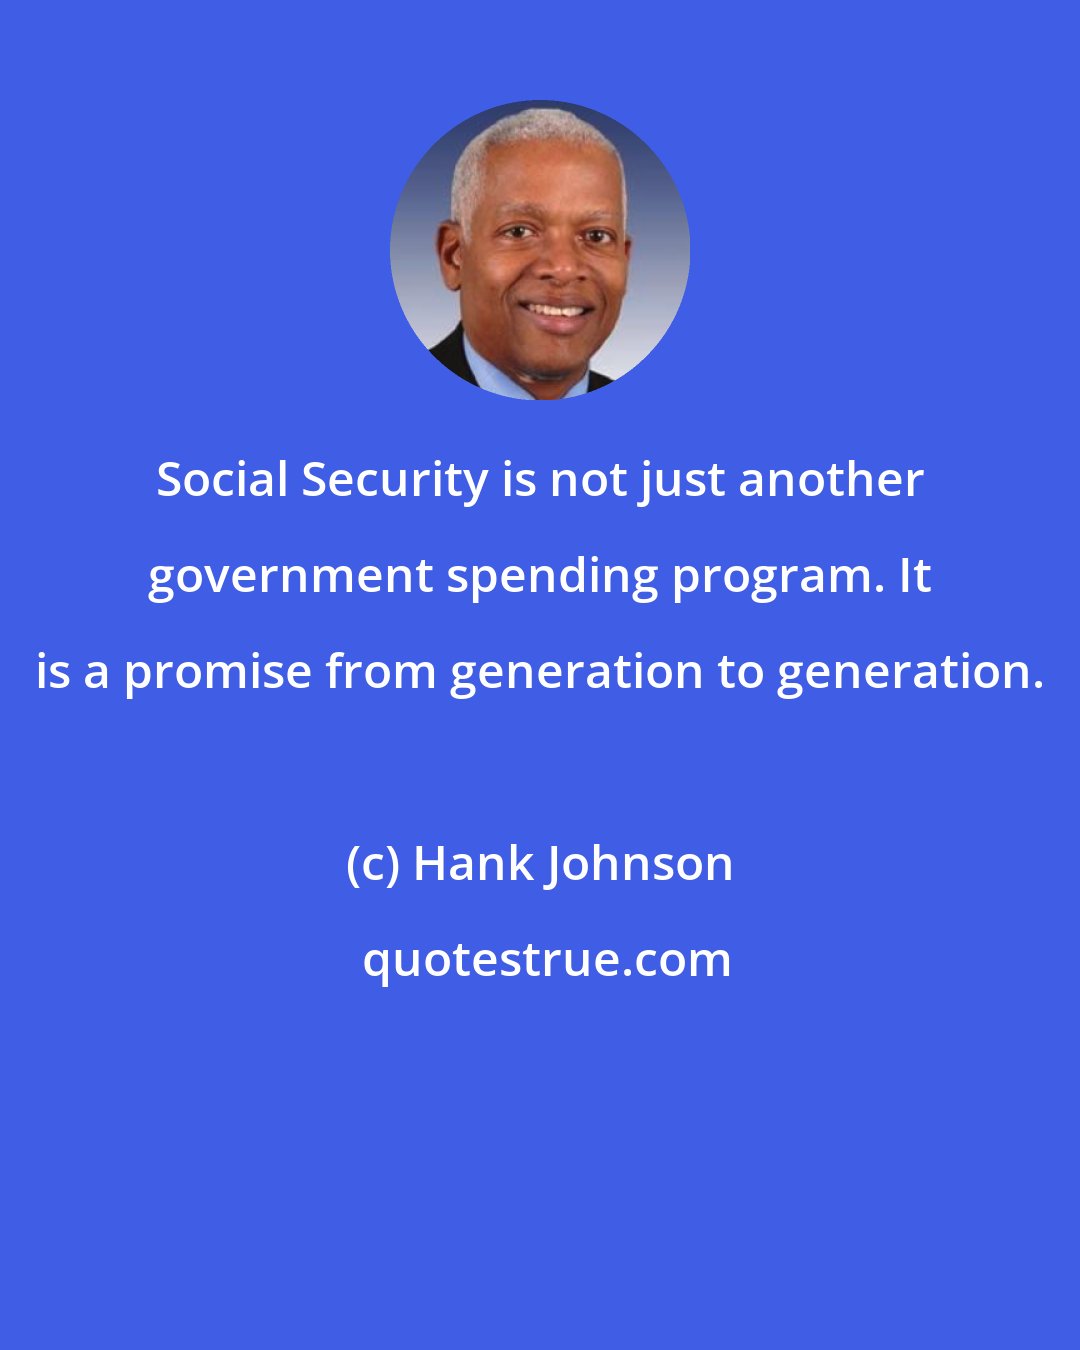 Hank Johnson: Social Security is not just another government spending program. It is a promise from generation to generation.